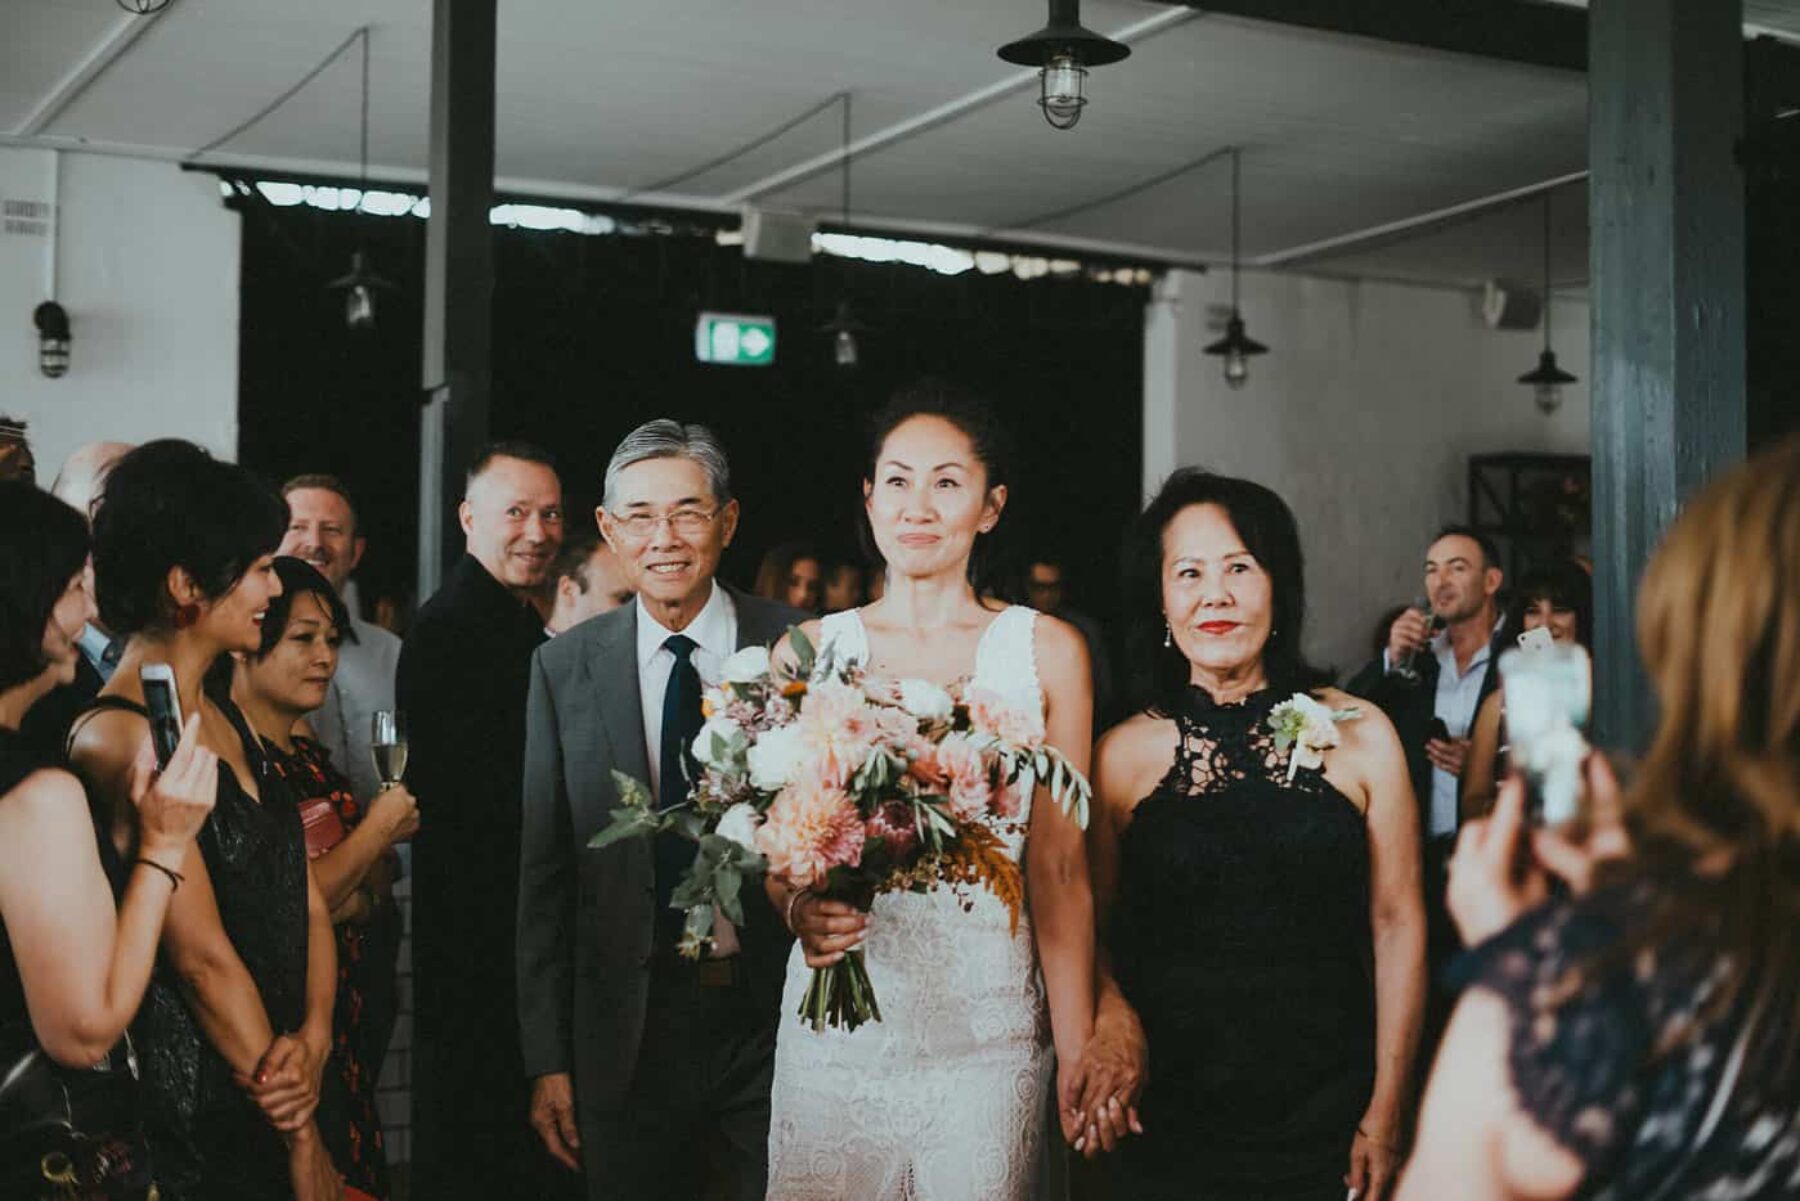 Modern Melbourne wedding at The Craft & Co in Collingwood / Photography by Tanya Voltchanskaya